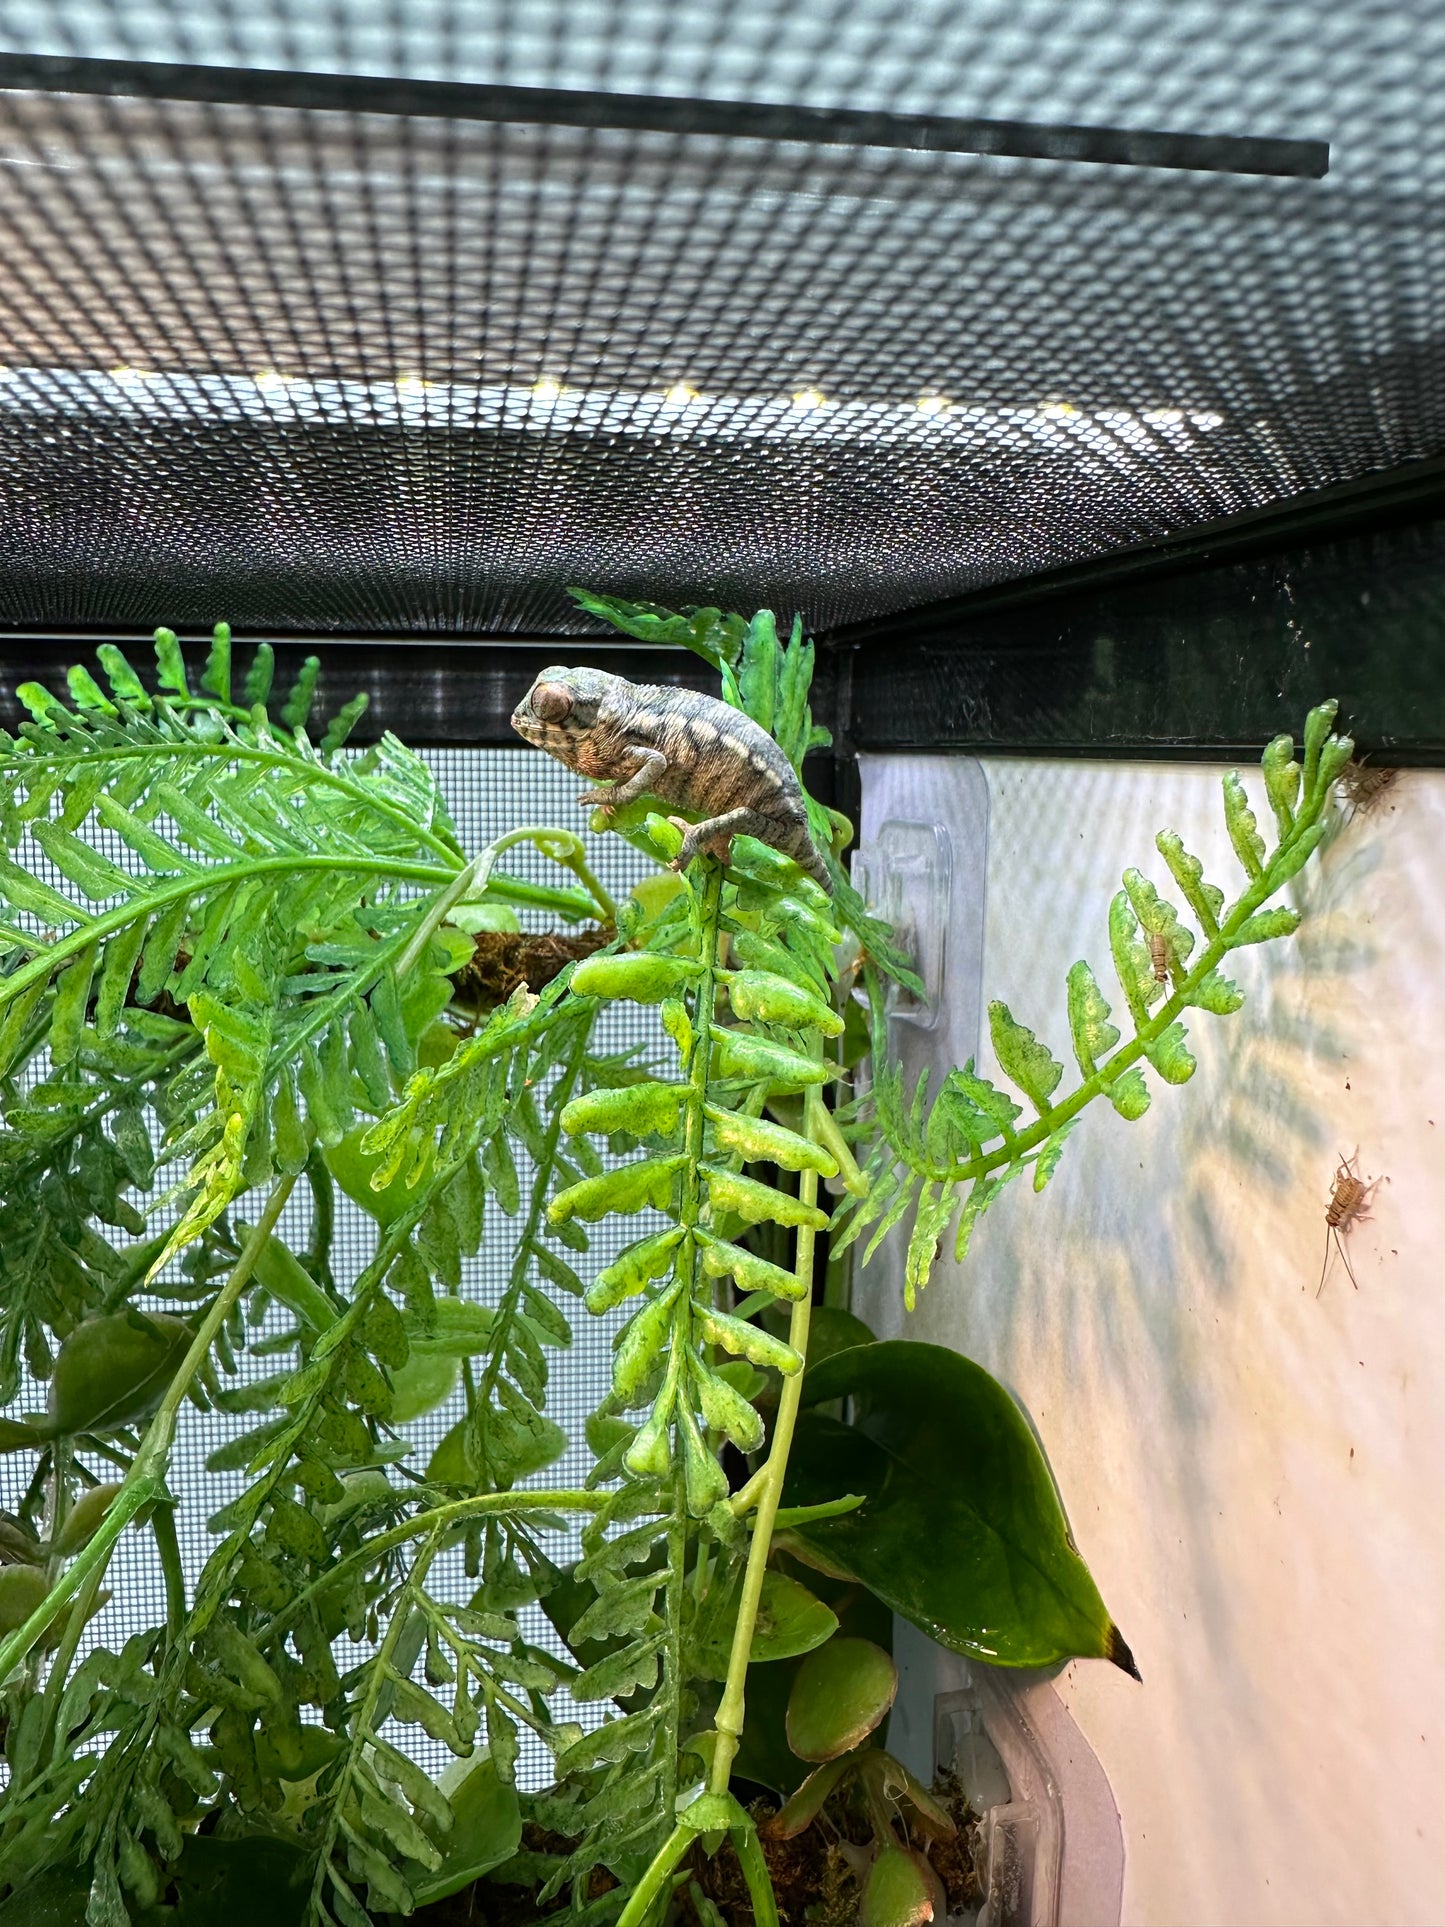 Ranboo and Dumpling - Unsexed Baby Chameleon with All-In-One Automated Habitat kit